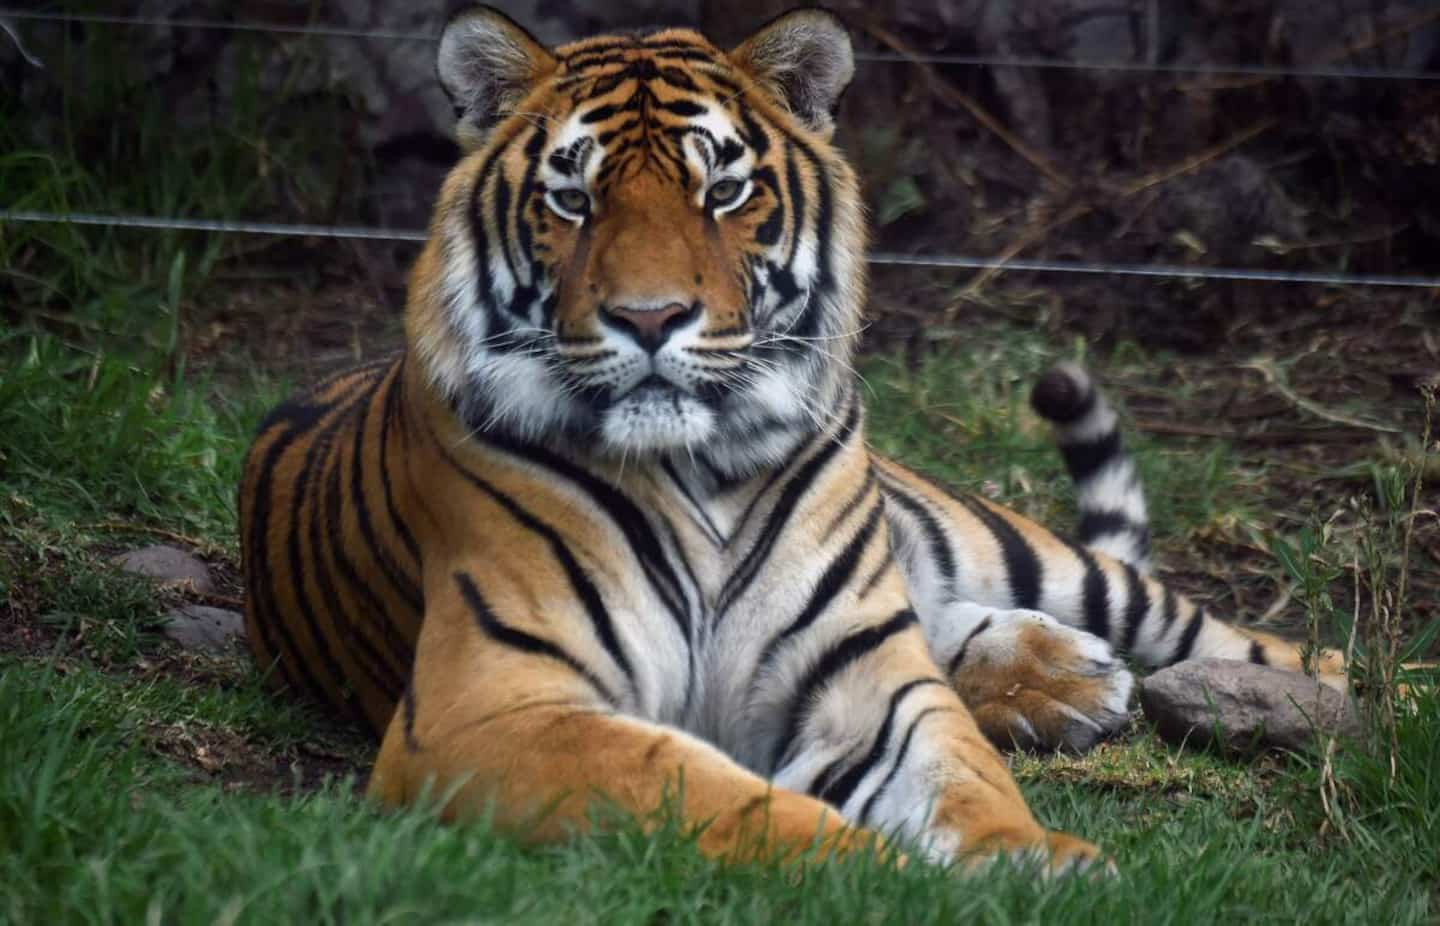 There are more wild tigers in the world than previously thought